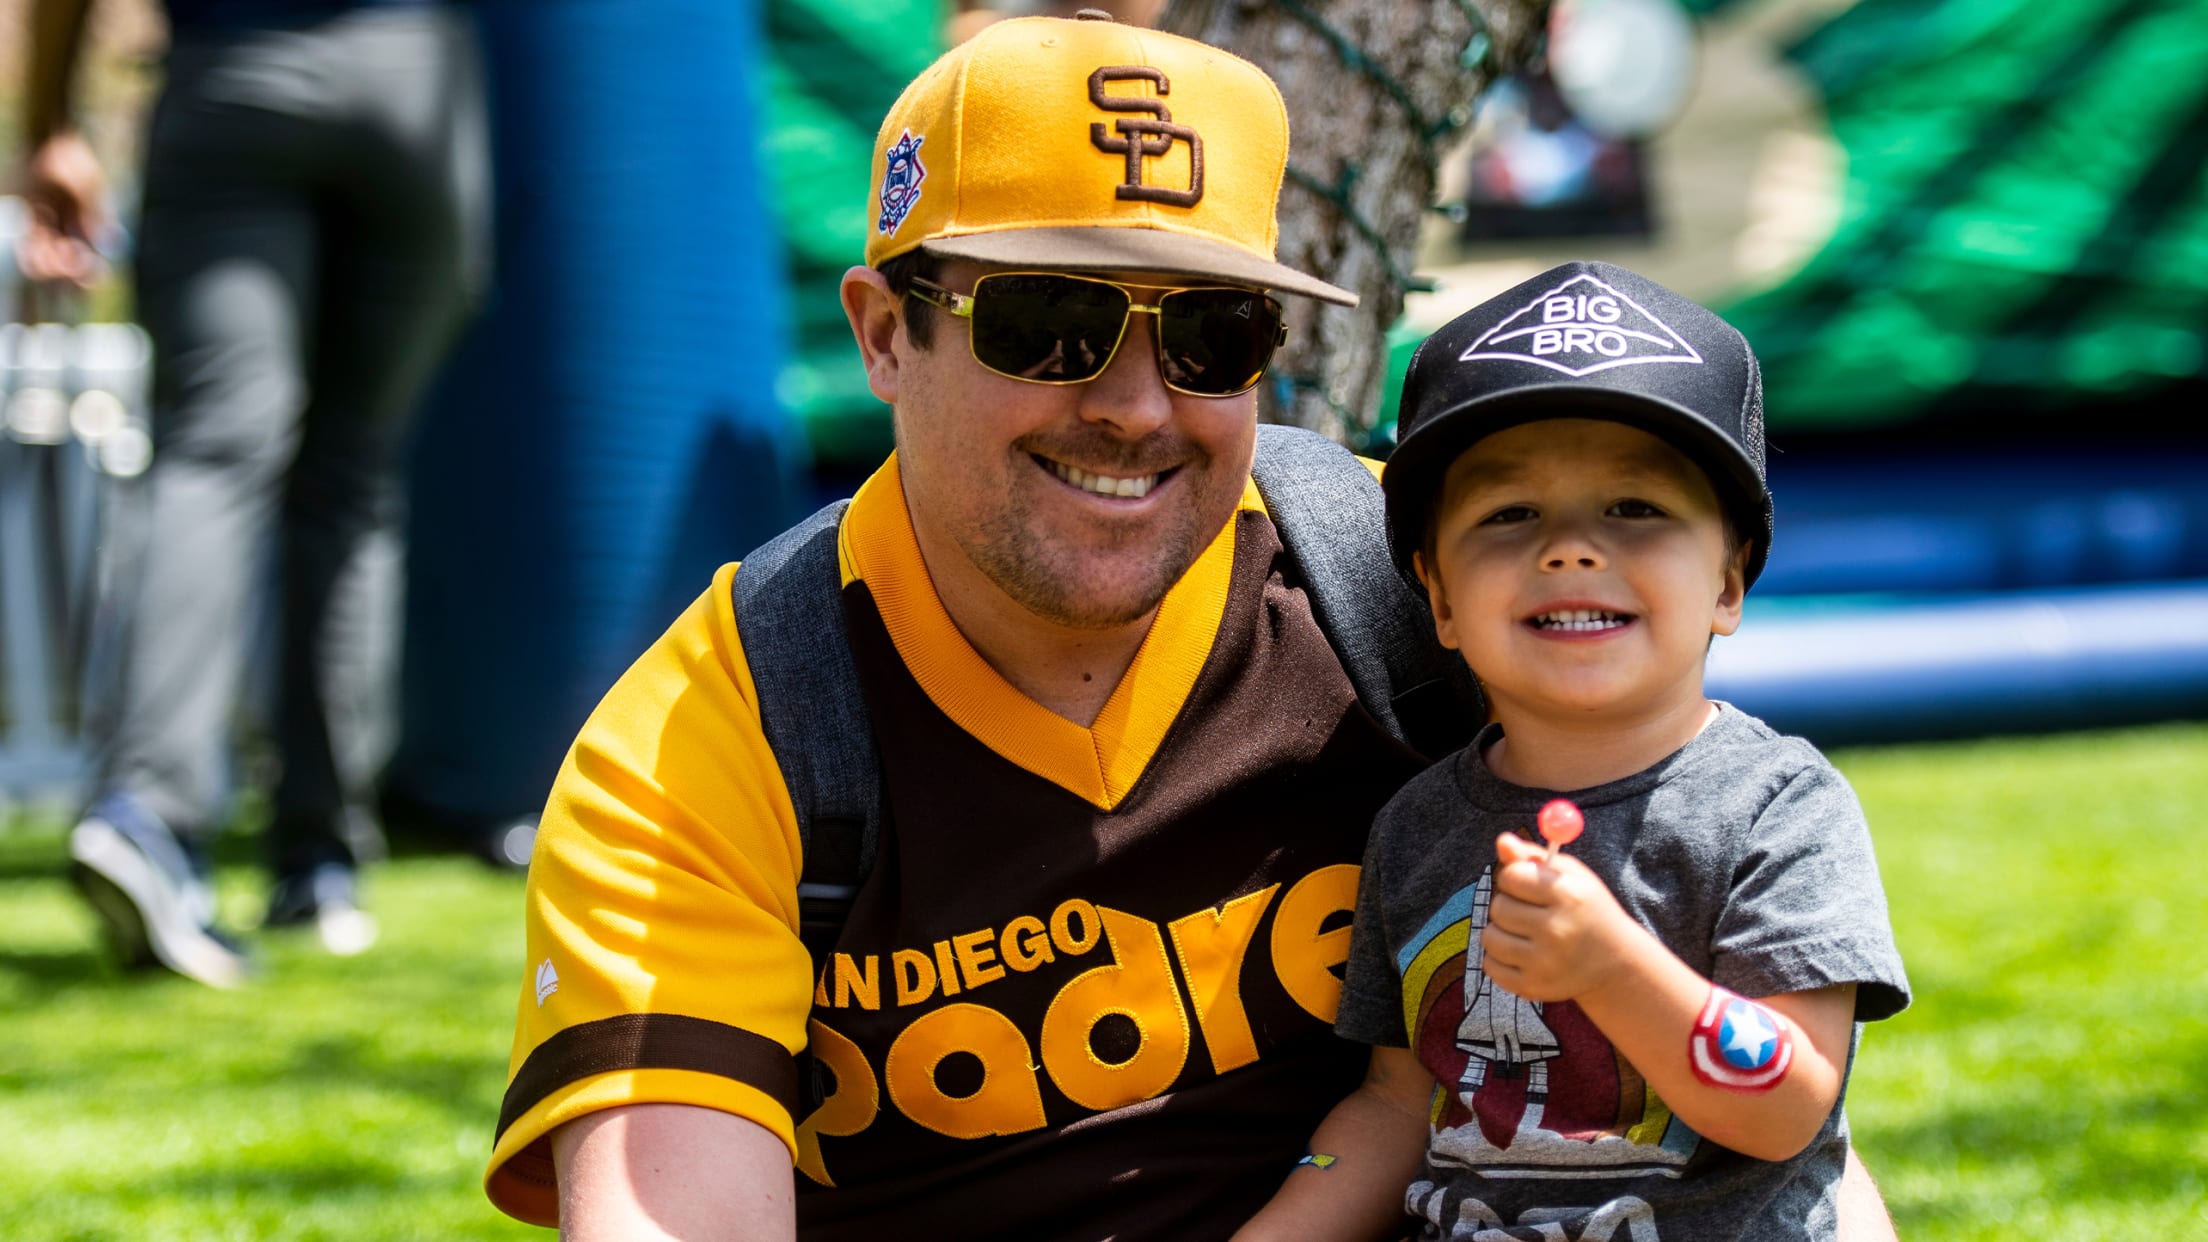 Enjoy some #CompadresFun with the - San Diego Padres